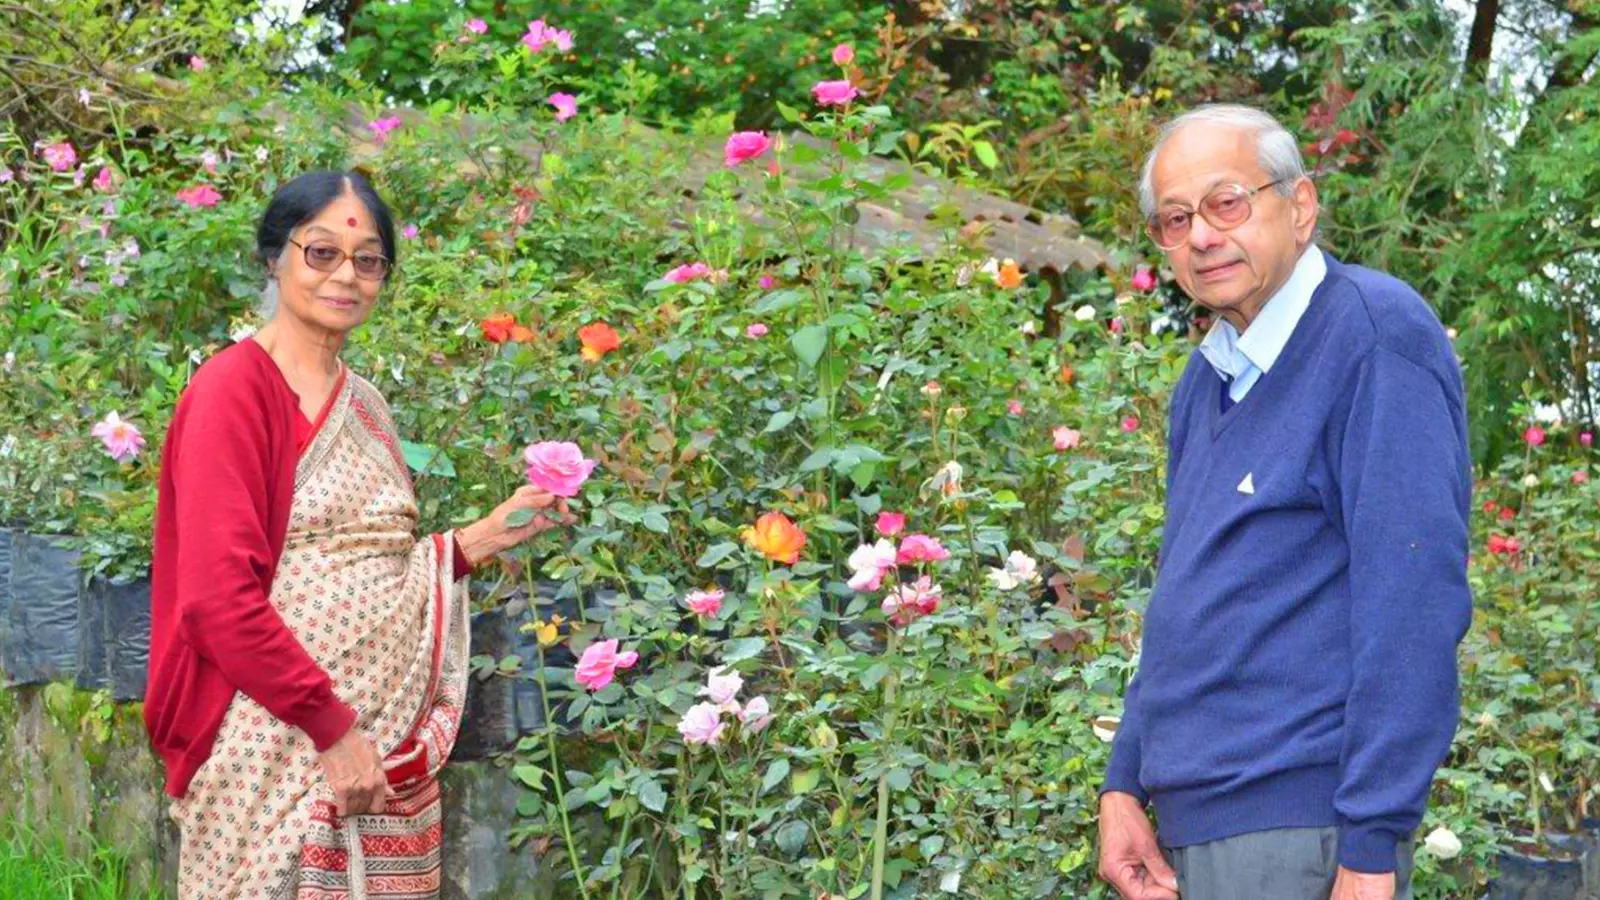 Coming up roses: A couple’s quest to add colours and variety to the king of flowers